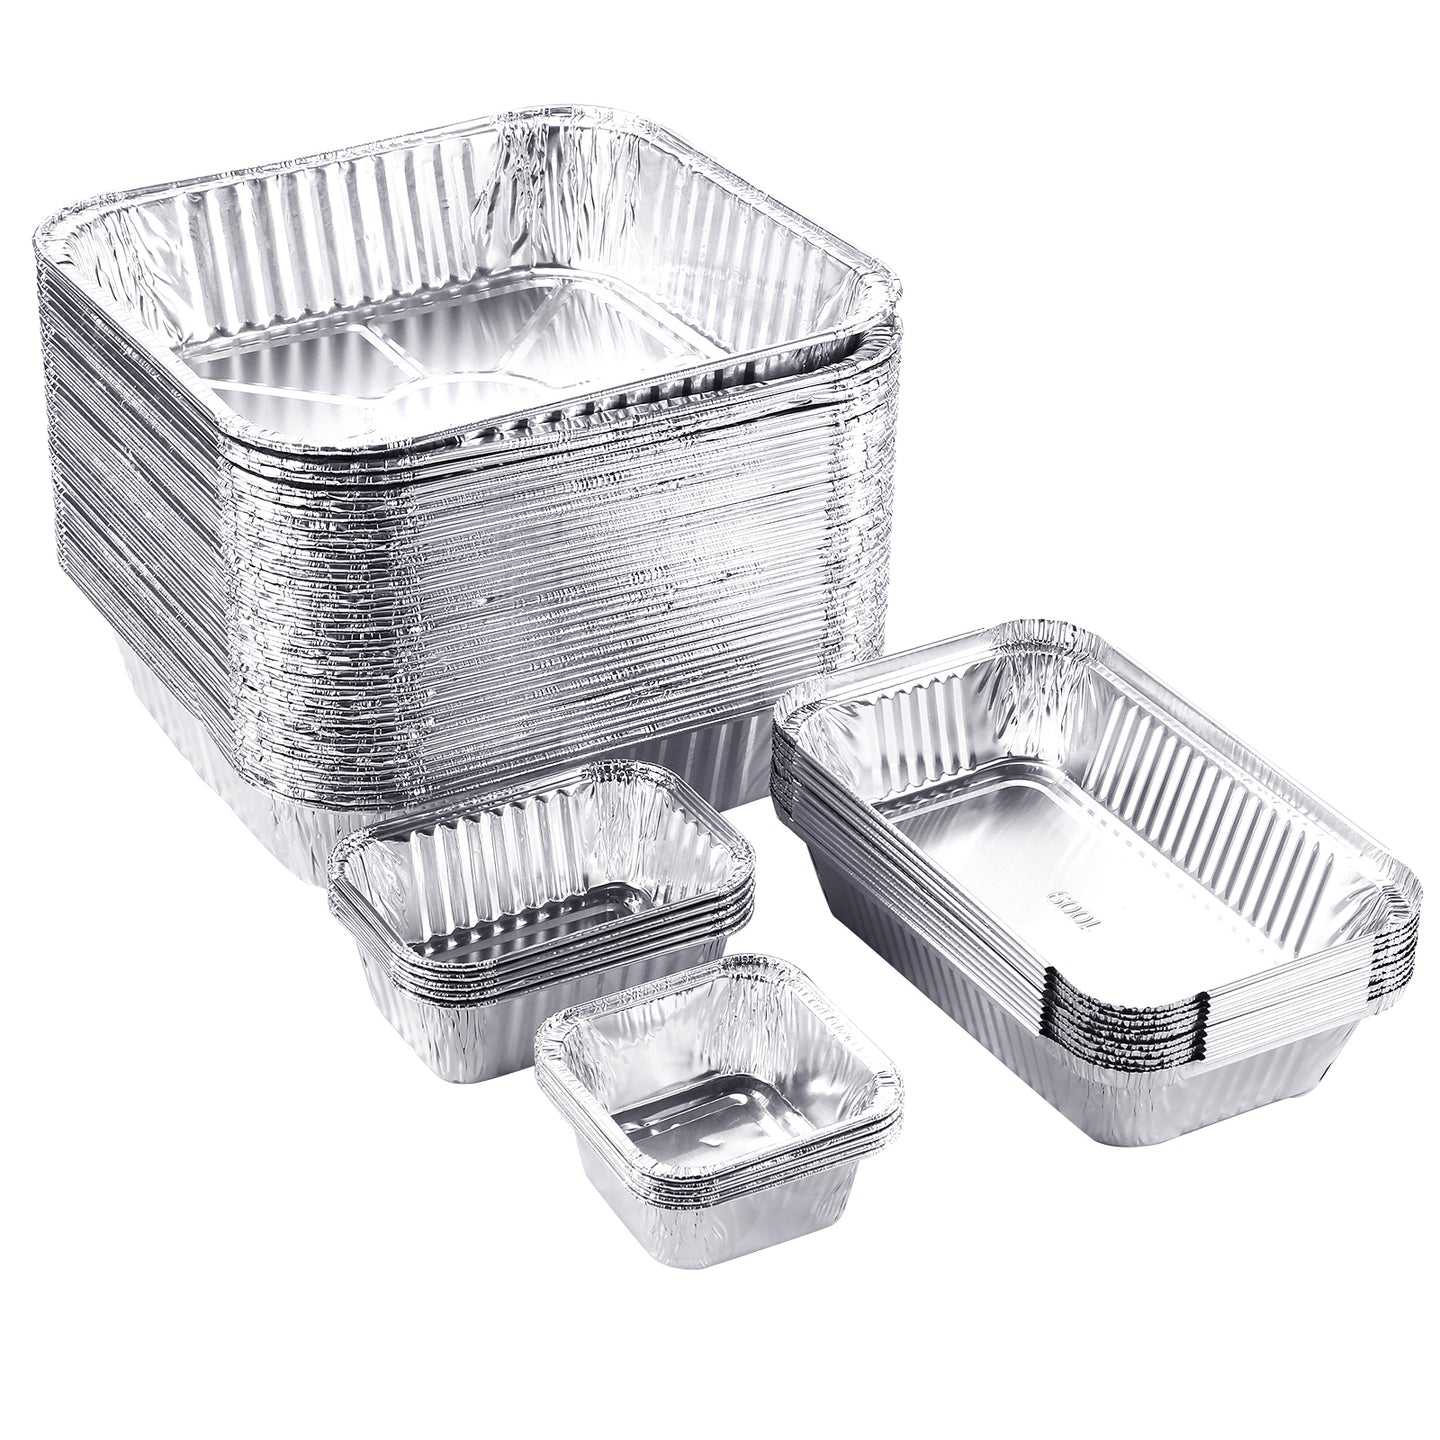 Aluminum Pans, IMAGE 51 Packs Aluminum Pans Disposable Heavy-Duty Tin Foil Pans, 8 8 Inches (36pcs) Foil Half Size Deep Steam Table Pan, Great for Cooking, Baking, Storing and Heating